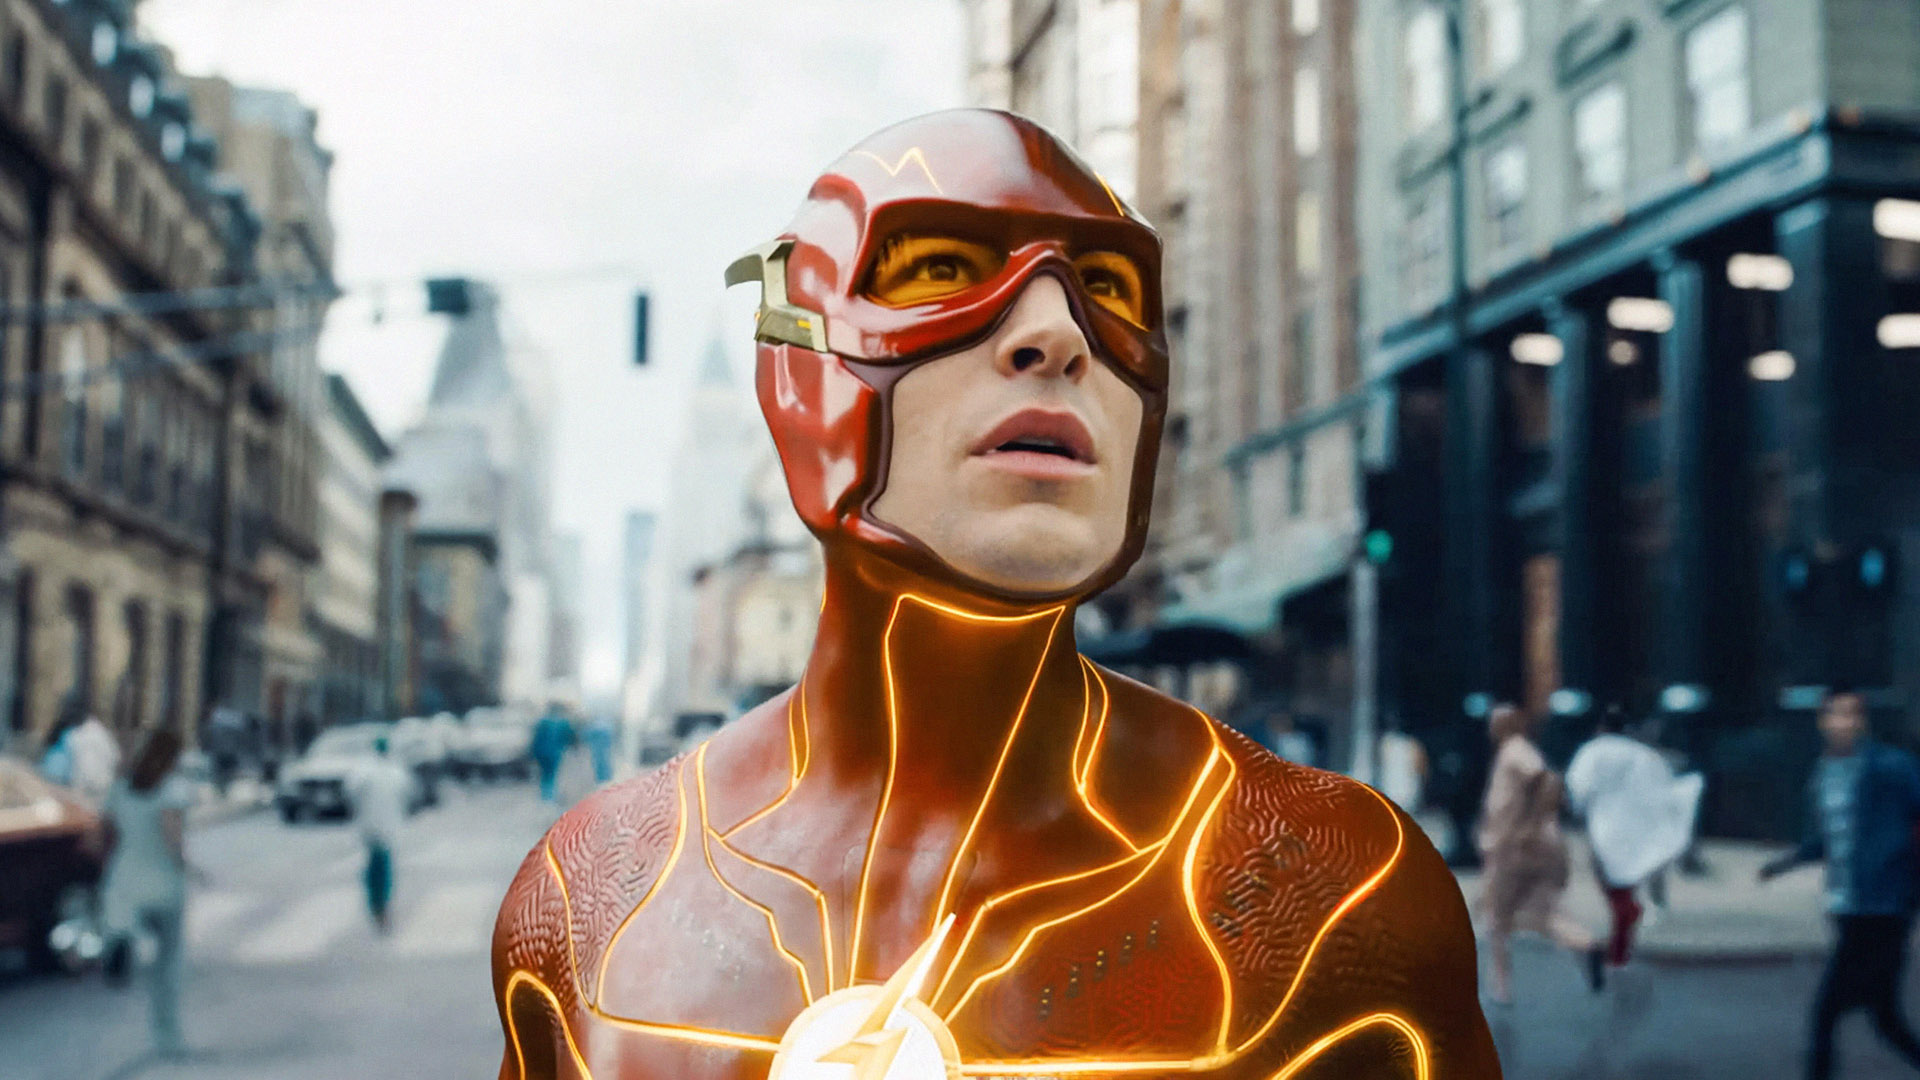 The Flash Box Office is Even More of a Disaster Than You Thought